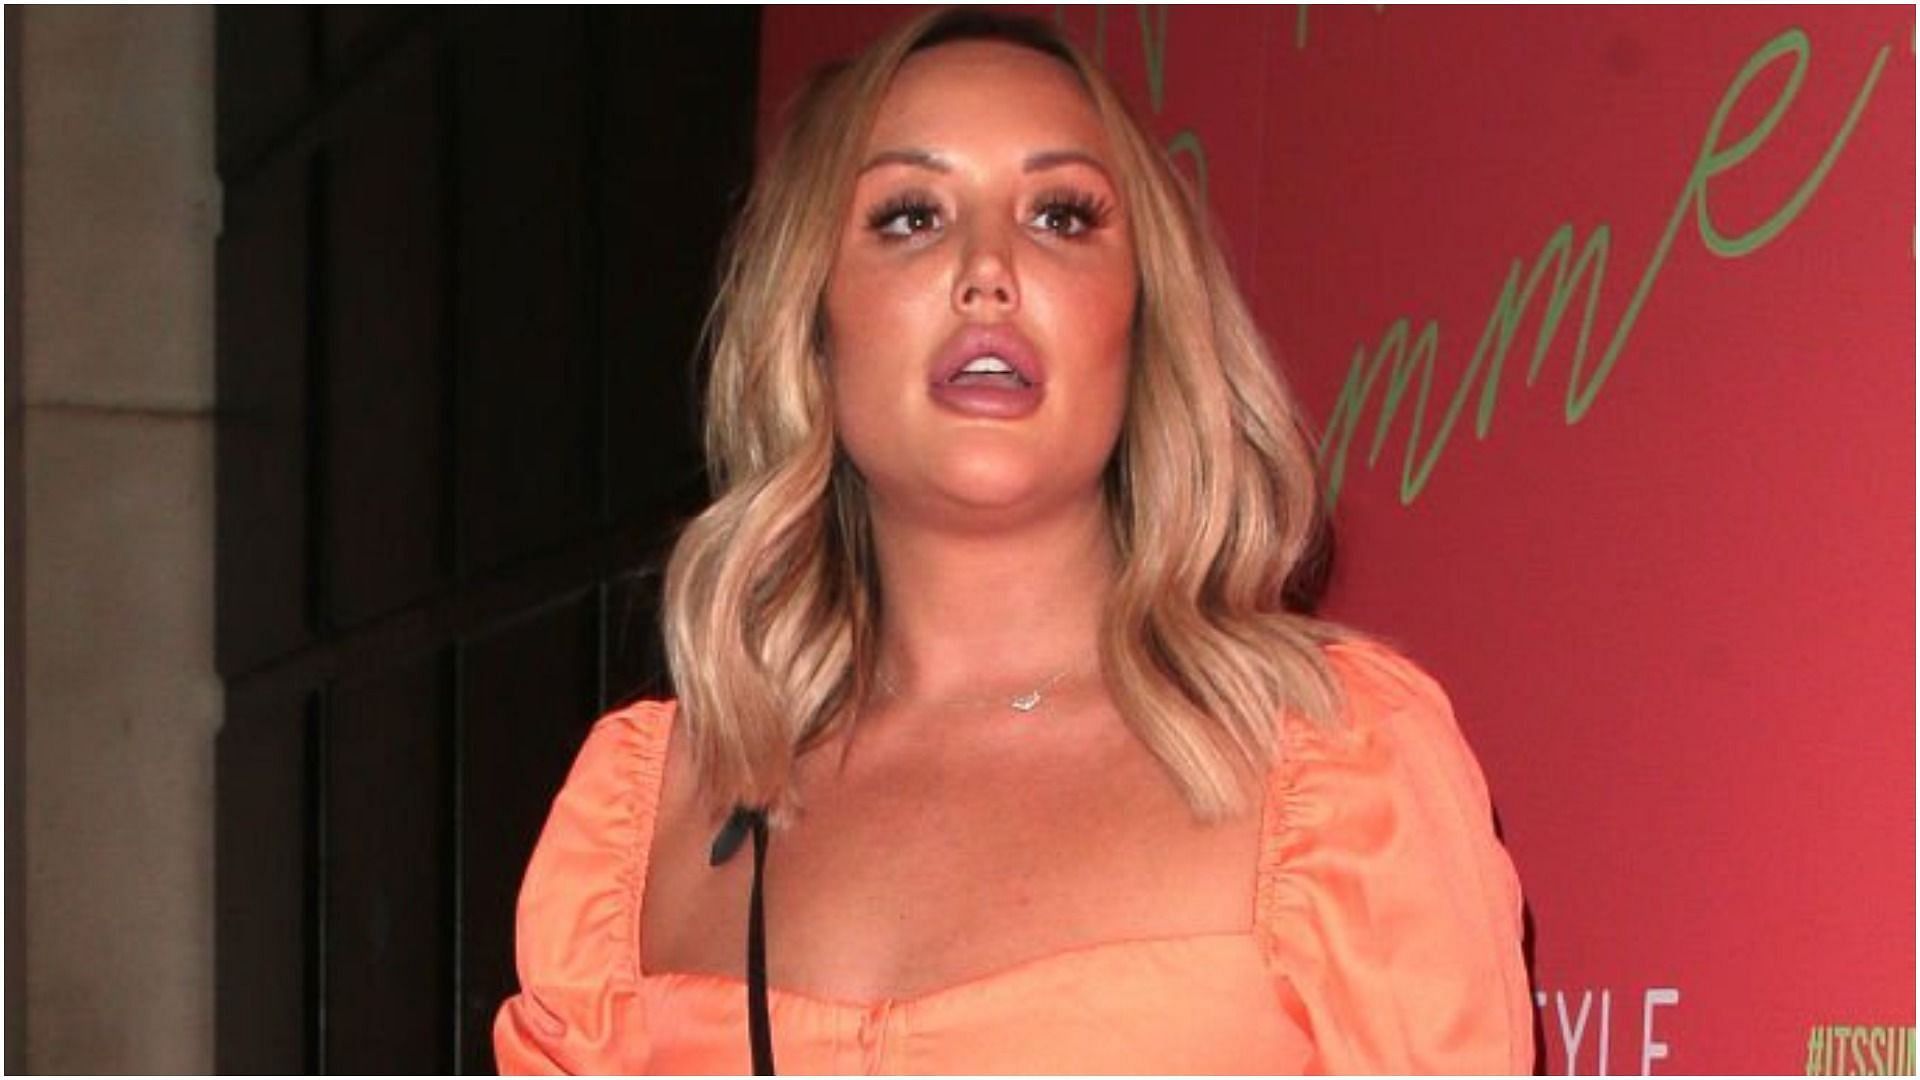 Charlotte Crosby has been in a relationship with Jake Ankers after her breakup with Liam Beaumont (Image via Ricky Vigil M/Getty Images)